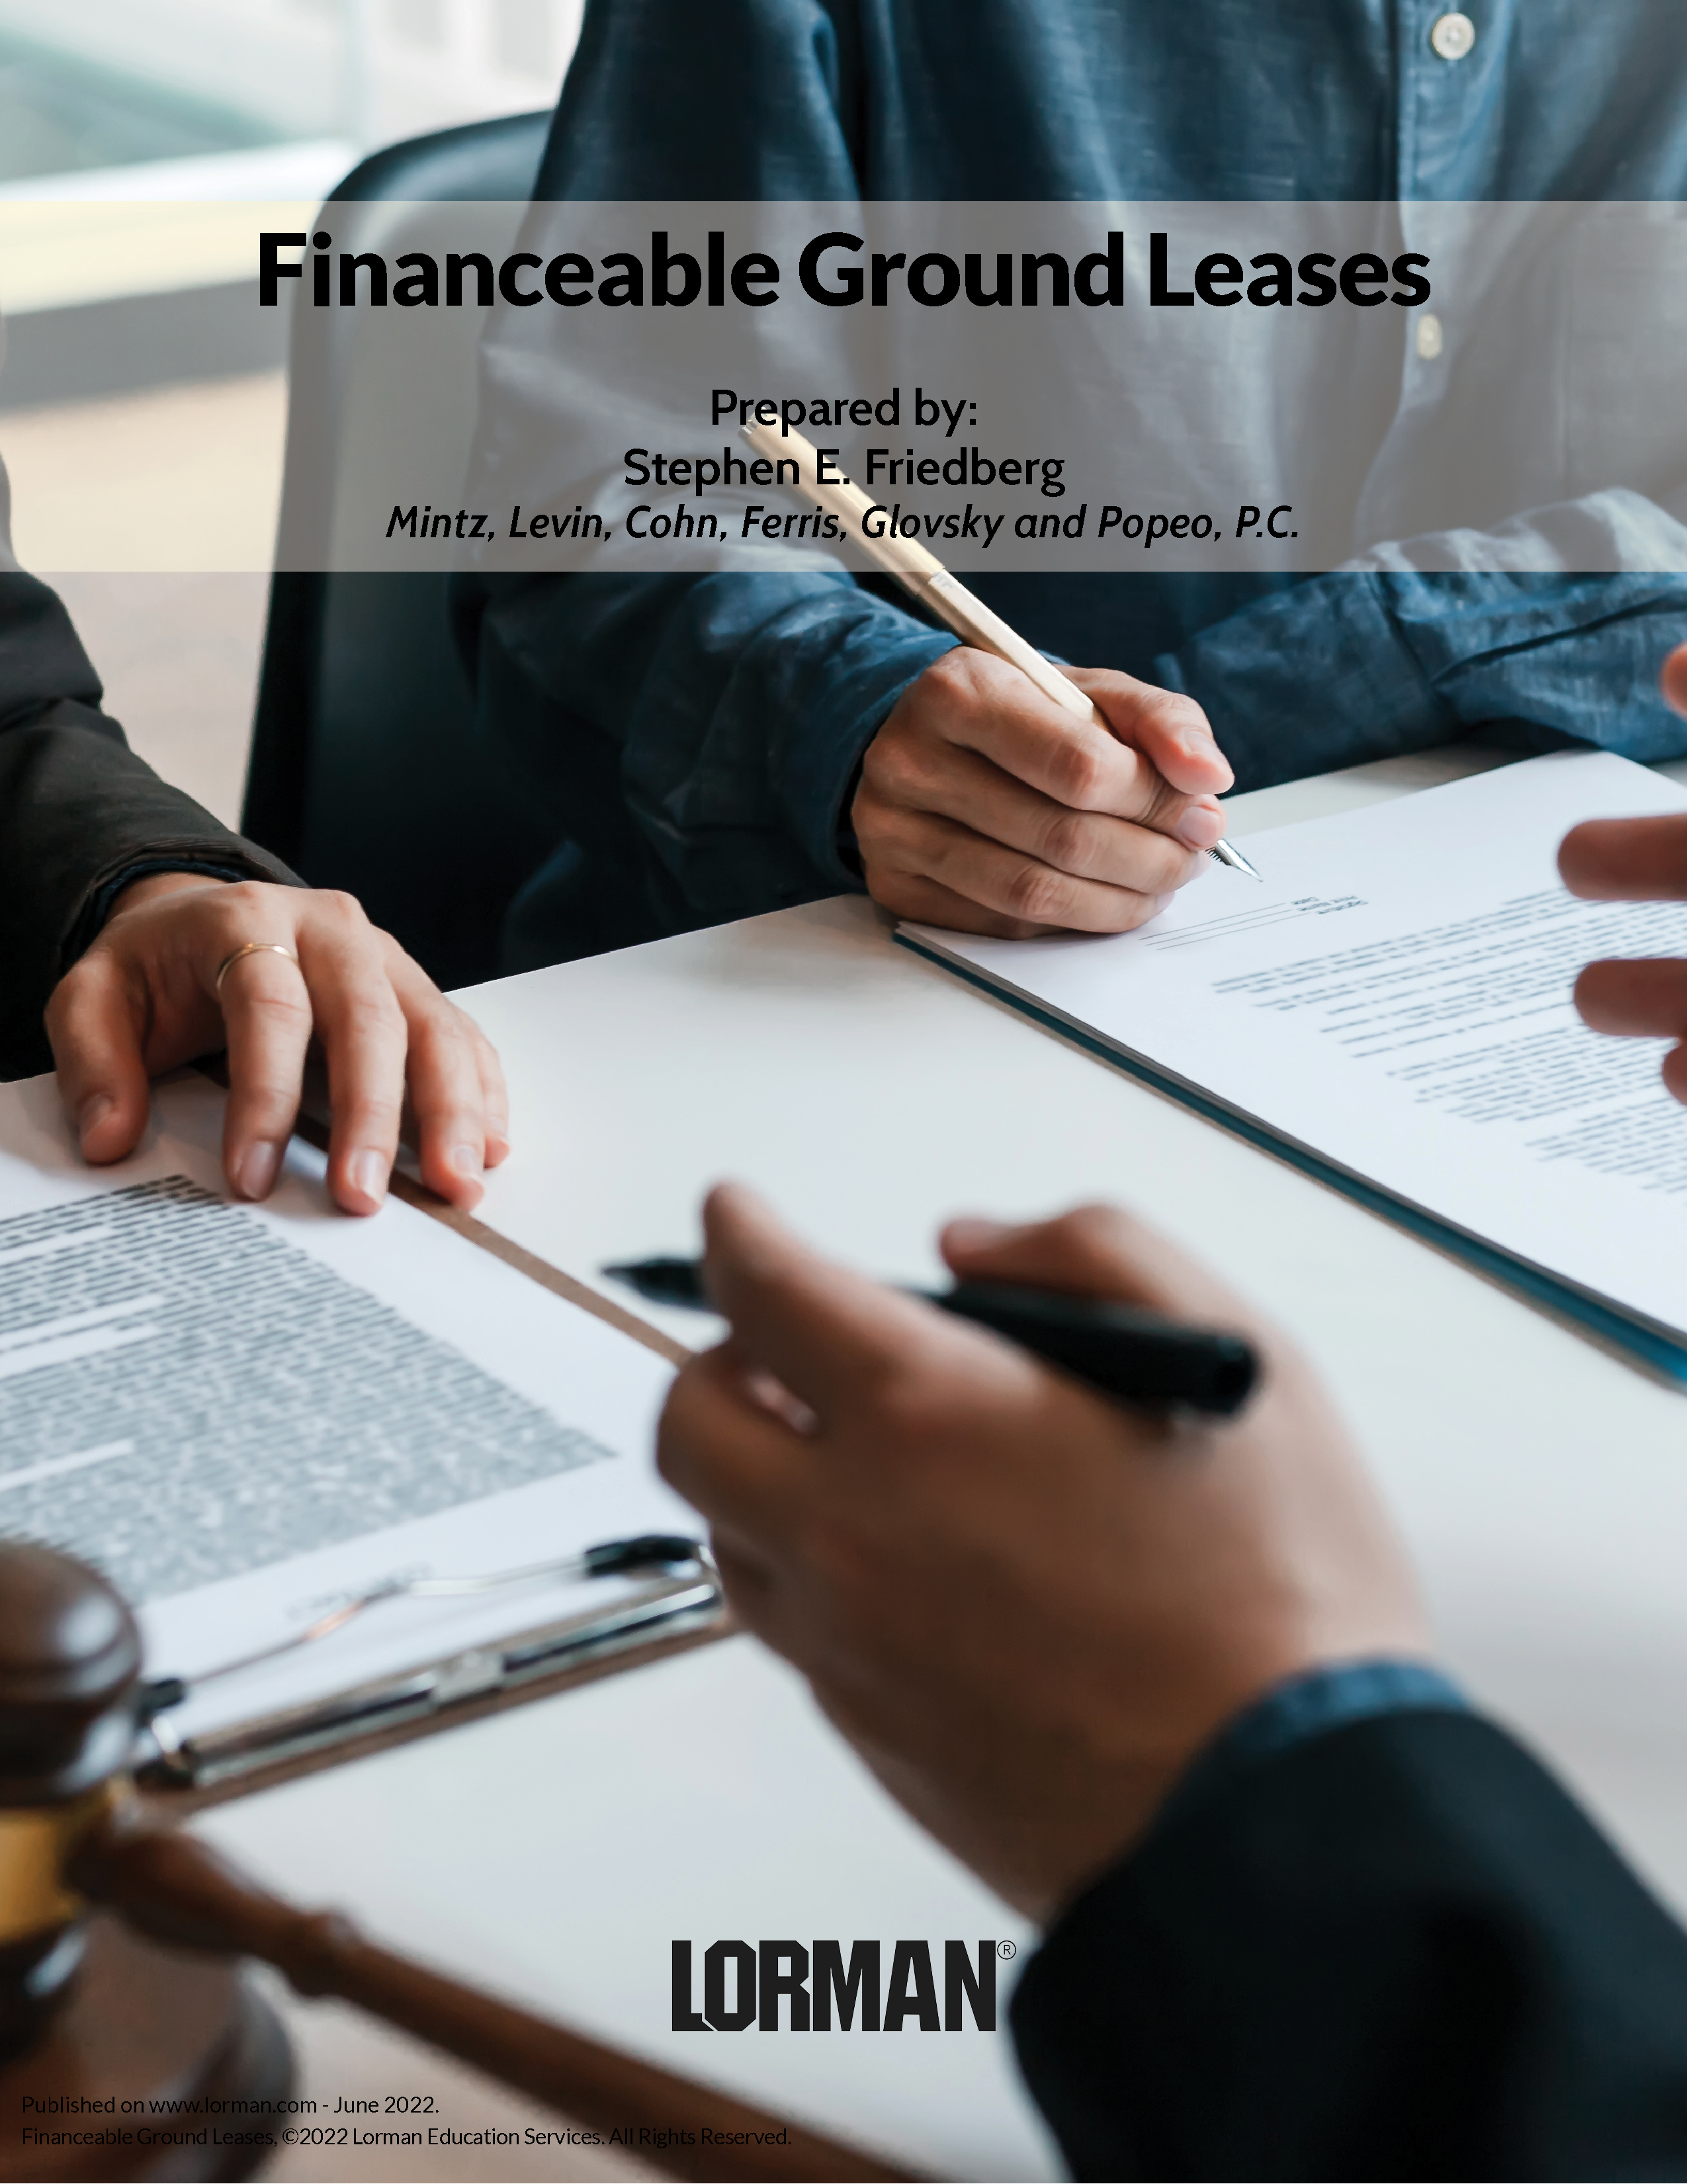 Financeable Ground Leases